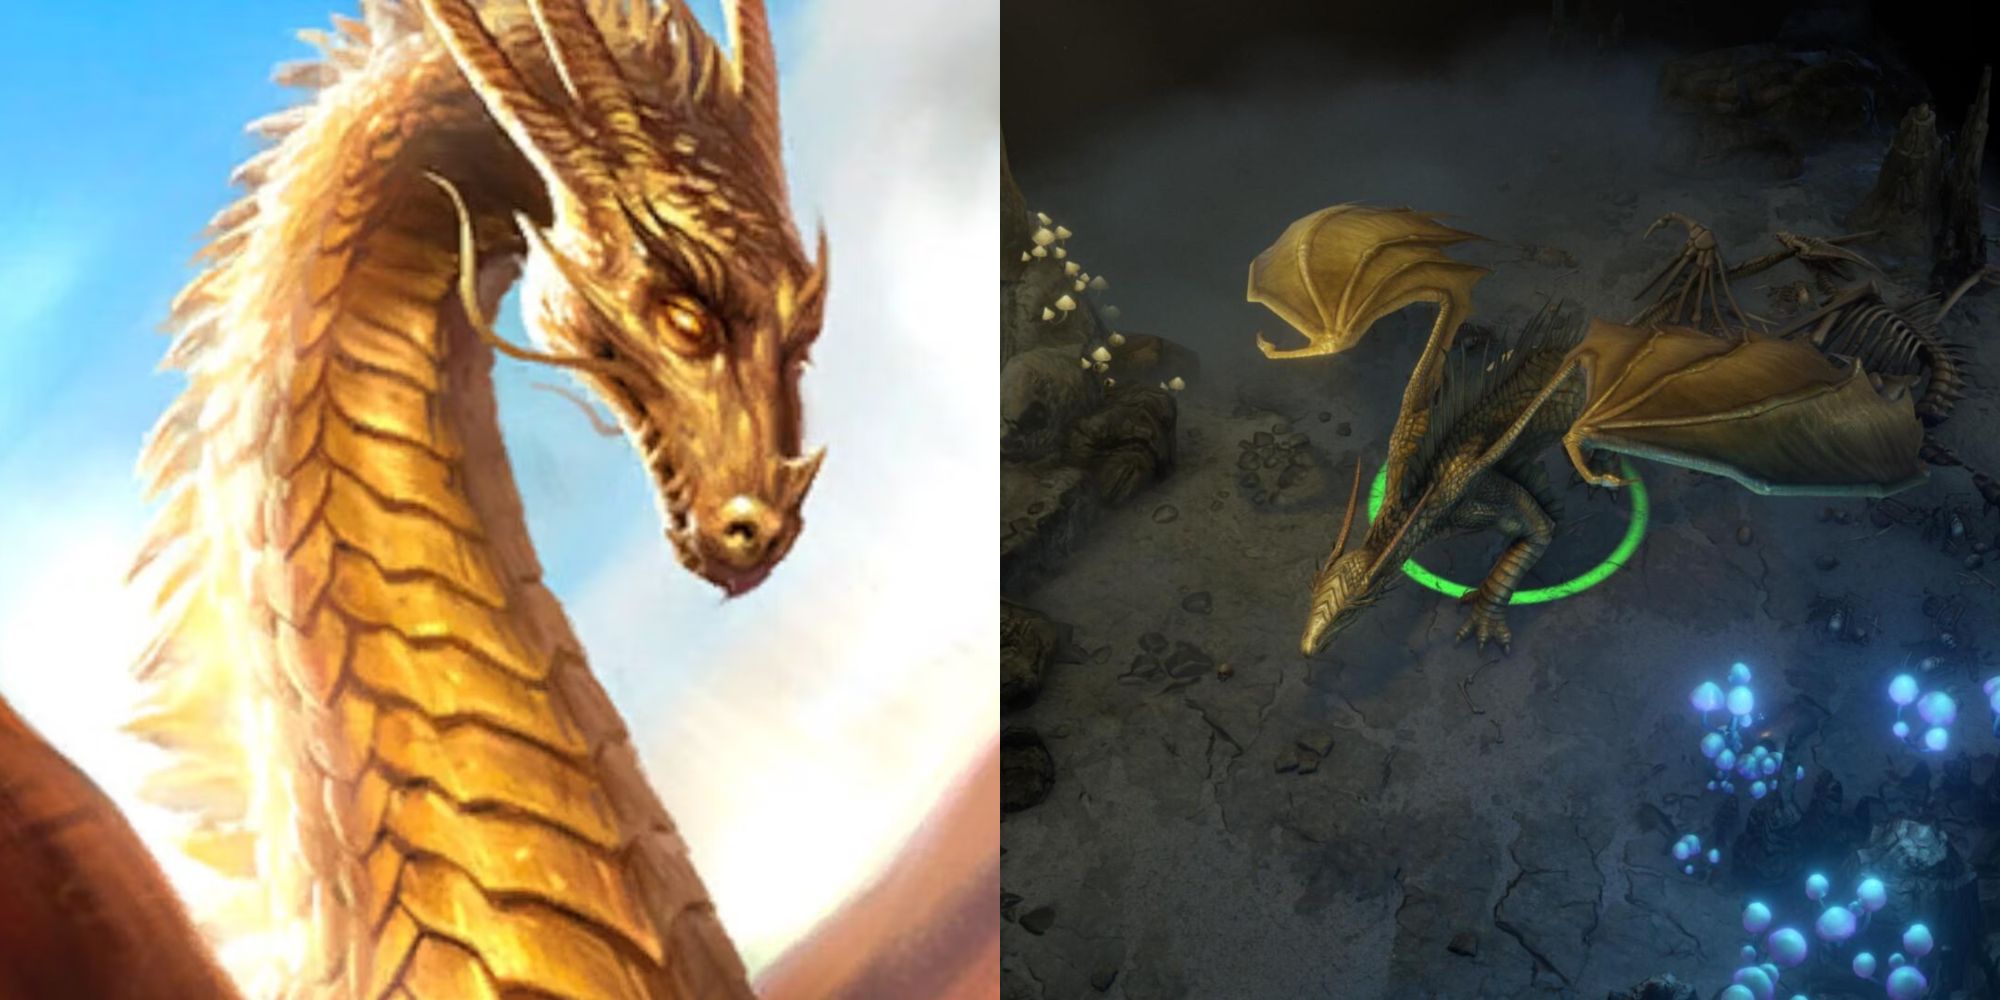 Pathfinder Wrath of the Righteous - Golden Dragon portrait and ingame